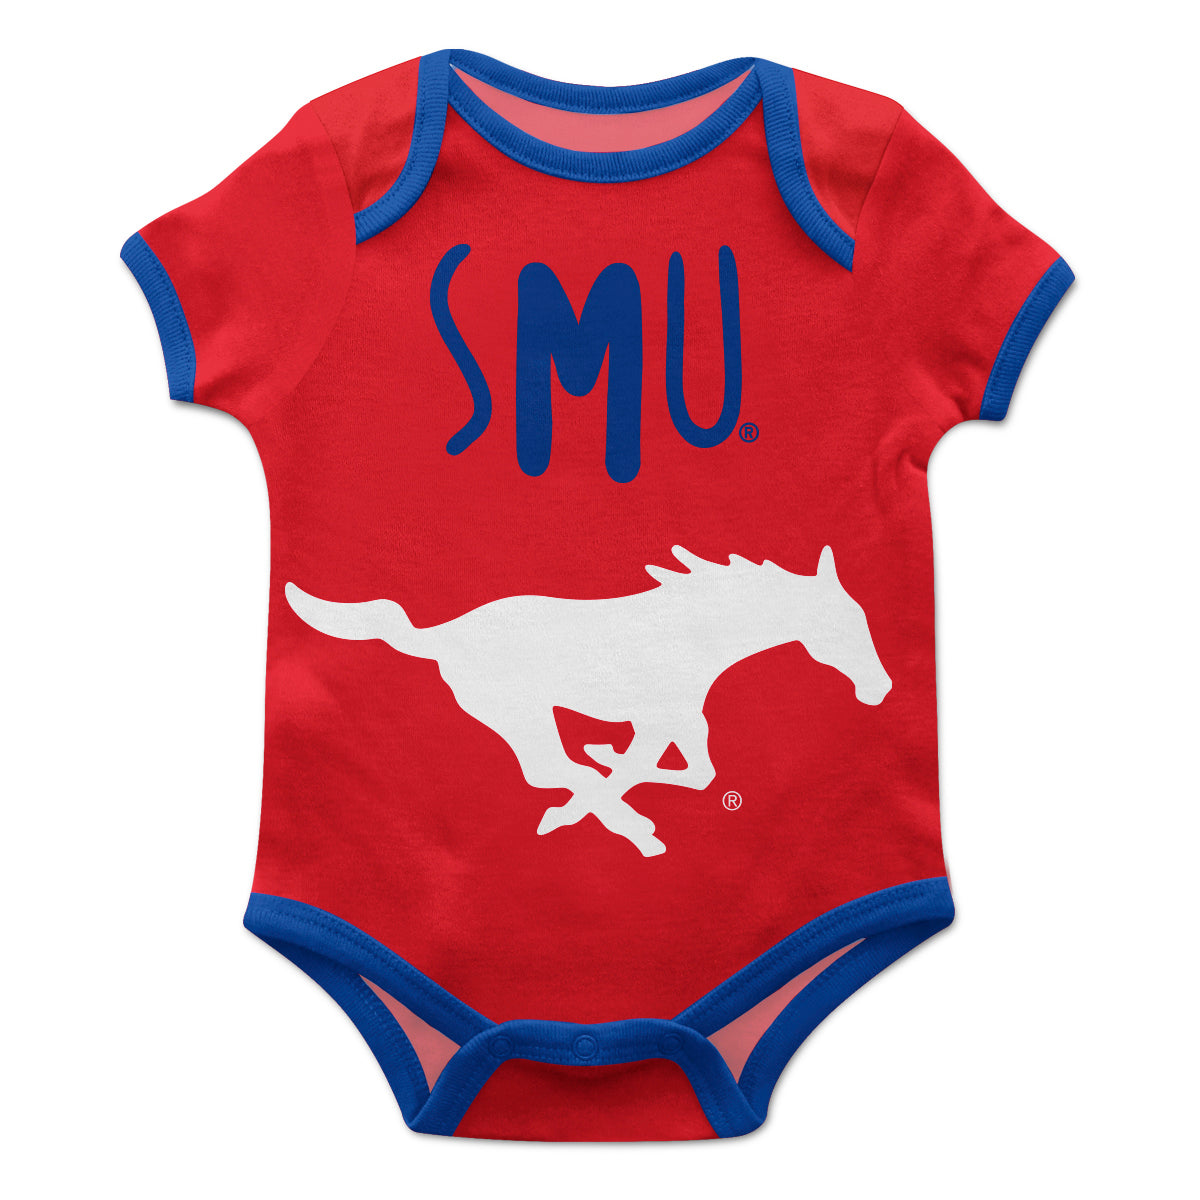 SMU Mustangs Red Solid Short Sleeve One Piece Jumpsuit by Vive La Fete